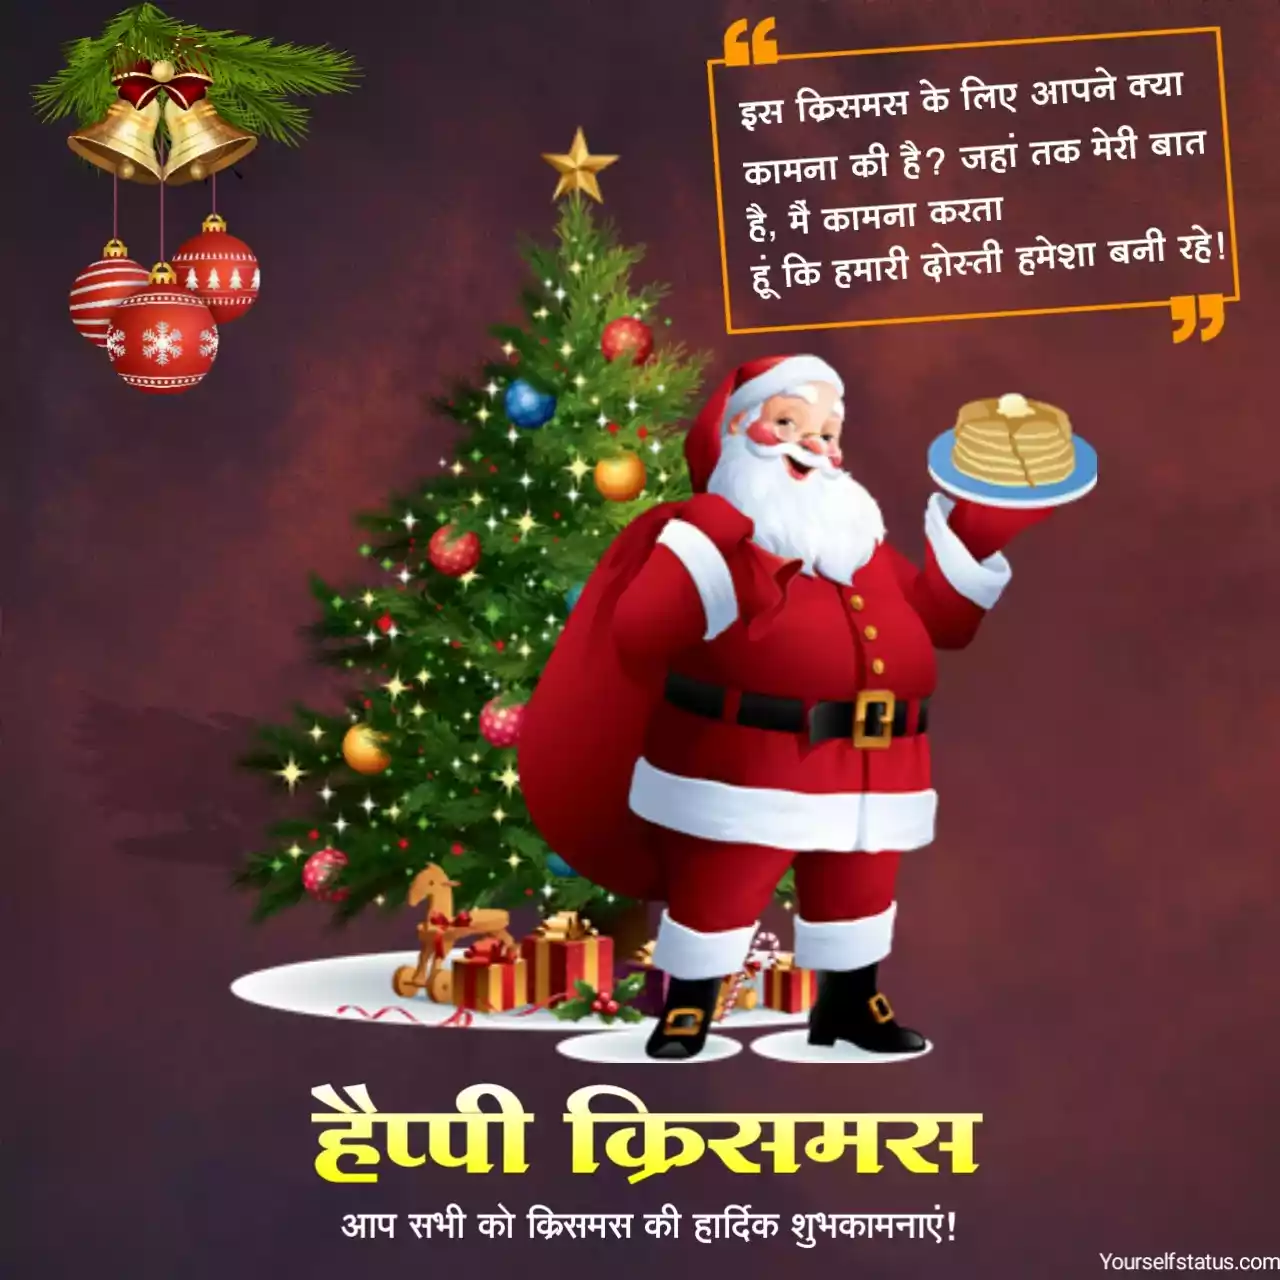 Christmas images for friends in hindi